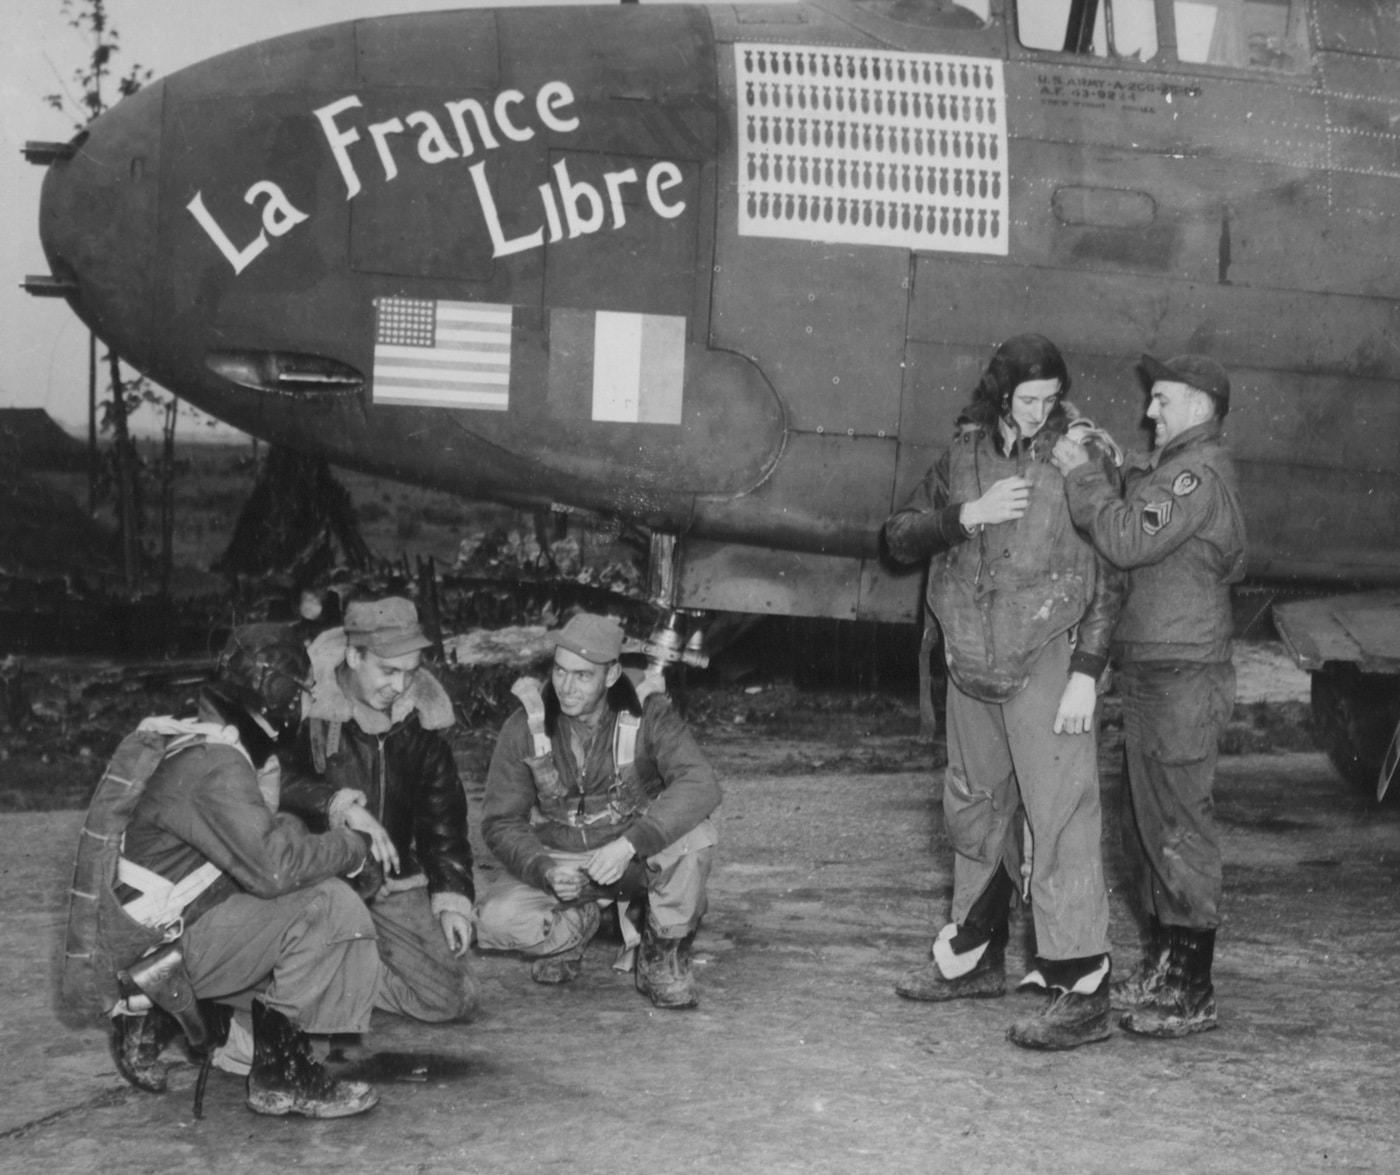 In this digital photograph, the ground crew and aircrew of the La France Libre bomber work together to prepare for a mission. The La France Libre was an A-20 bomber that was the first in the 9th Air Force to complete 100 missions against Nazi Germany. Nazi Germany, officially known as the German Reich until 1943, later the Greater German Reich, is the term used by historians to describe the German state between 1933 and 1945, when Adolf Hitler and the Nazi Party controlled the country, transforming it into a totalitarian dictatorship.